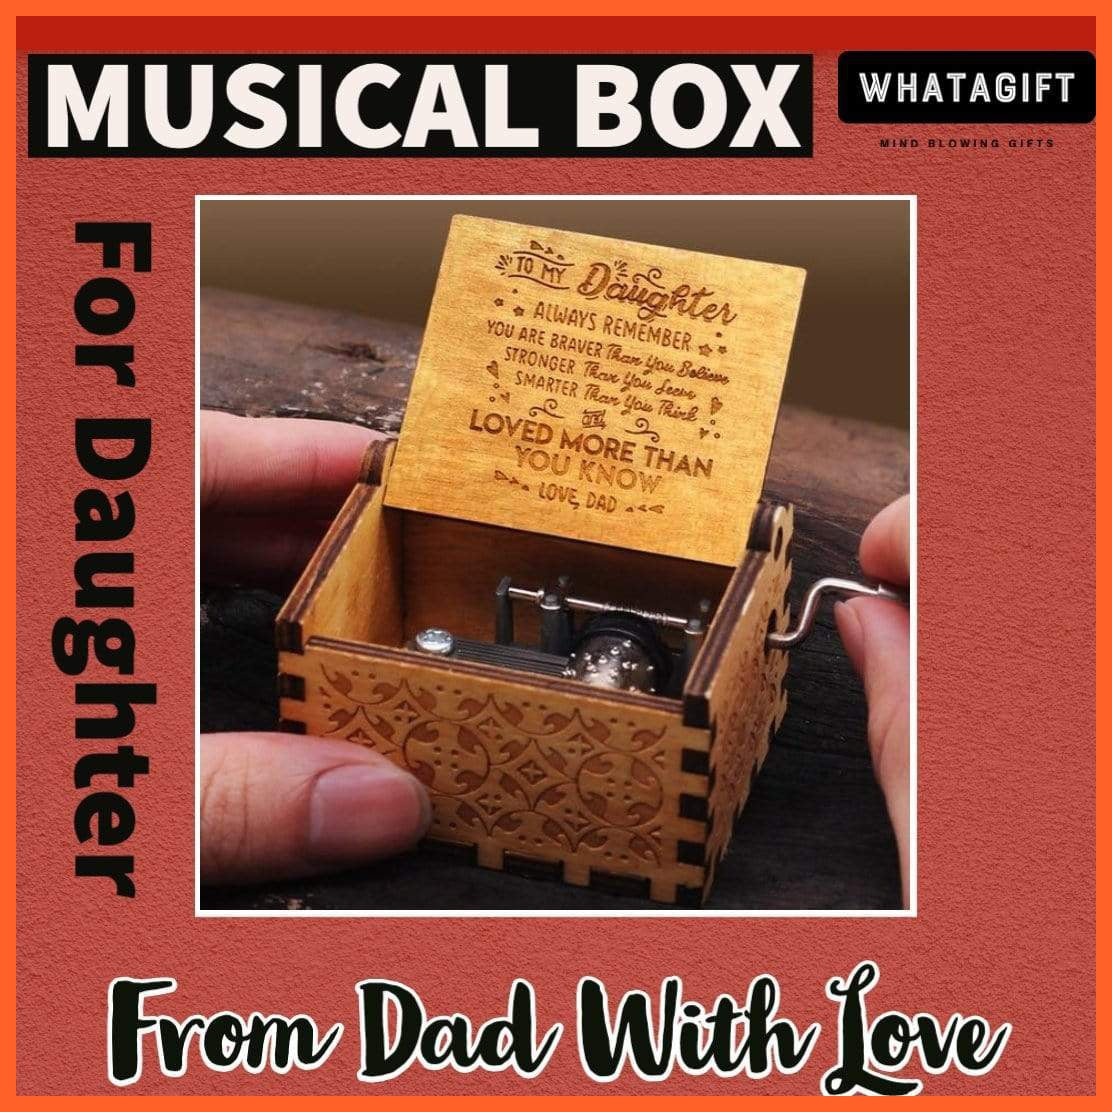 Wooden Classical Music Box For My Daughter With Love | whatagift.com.au.